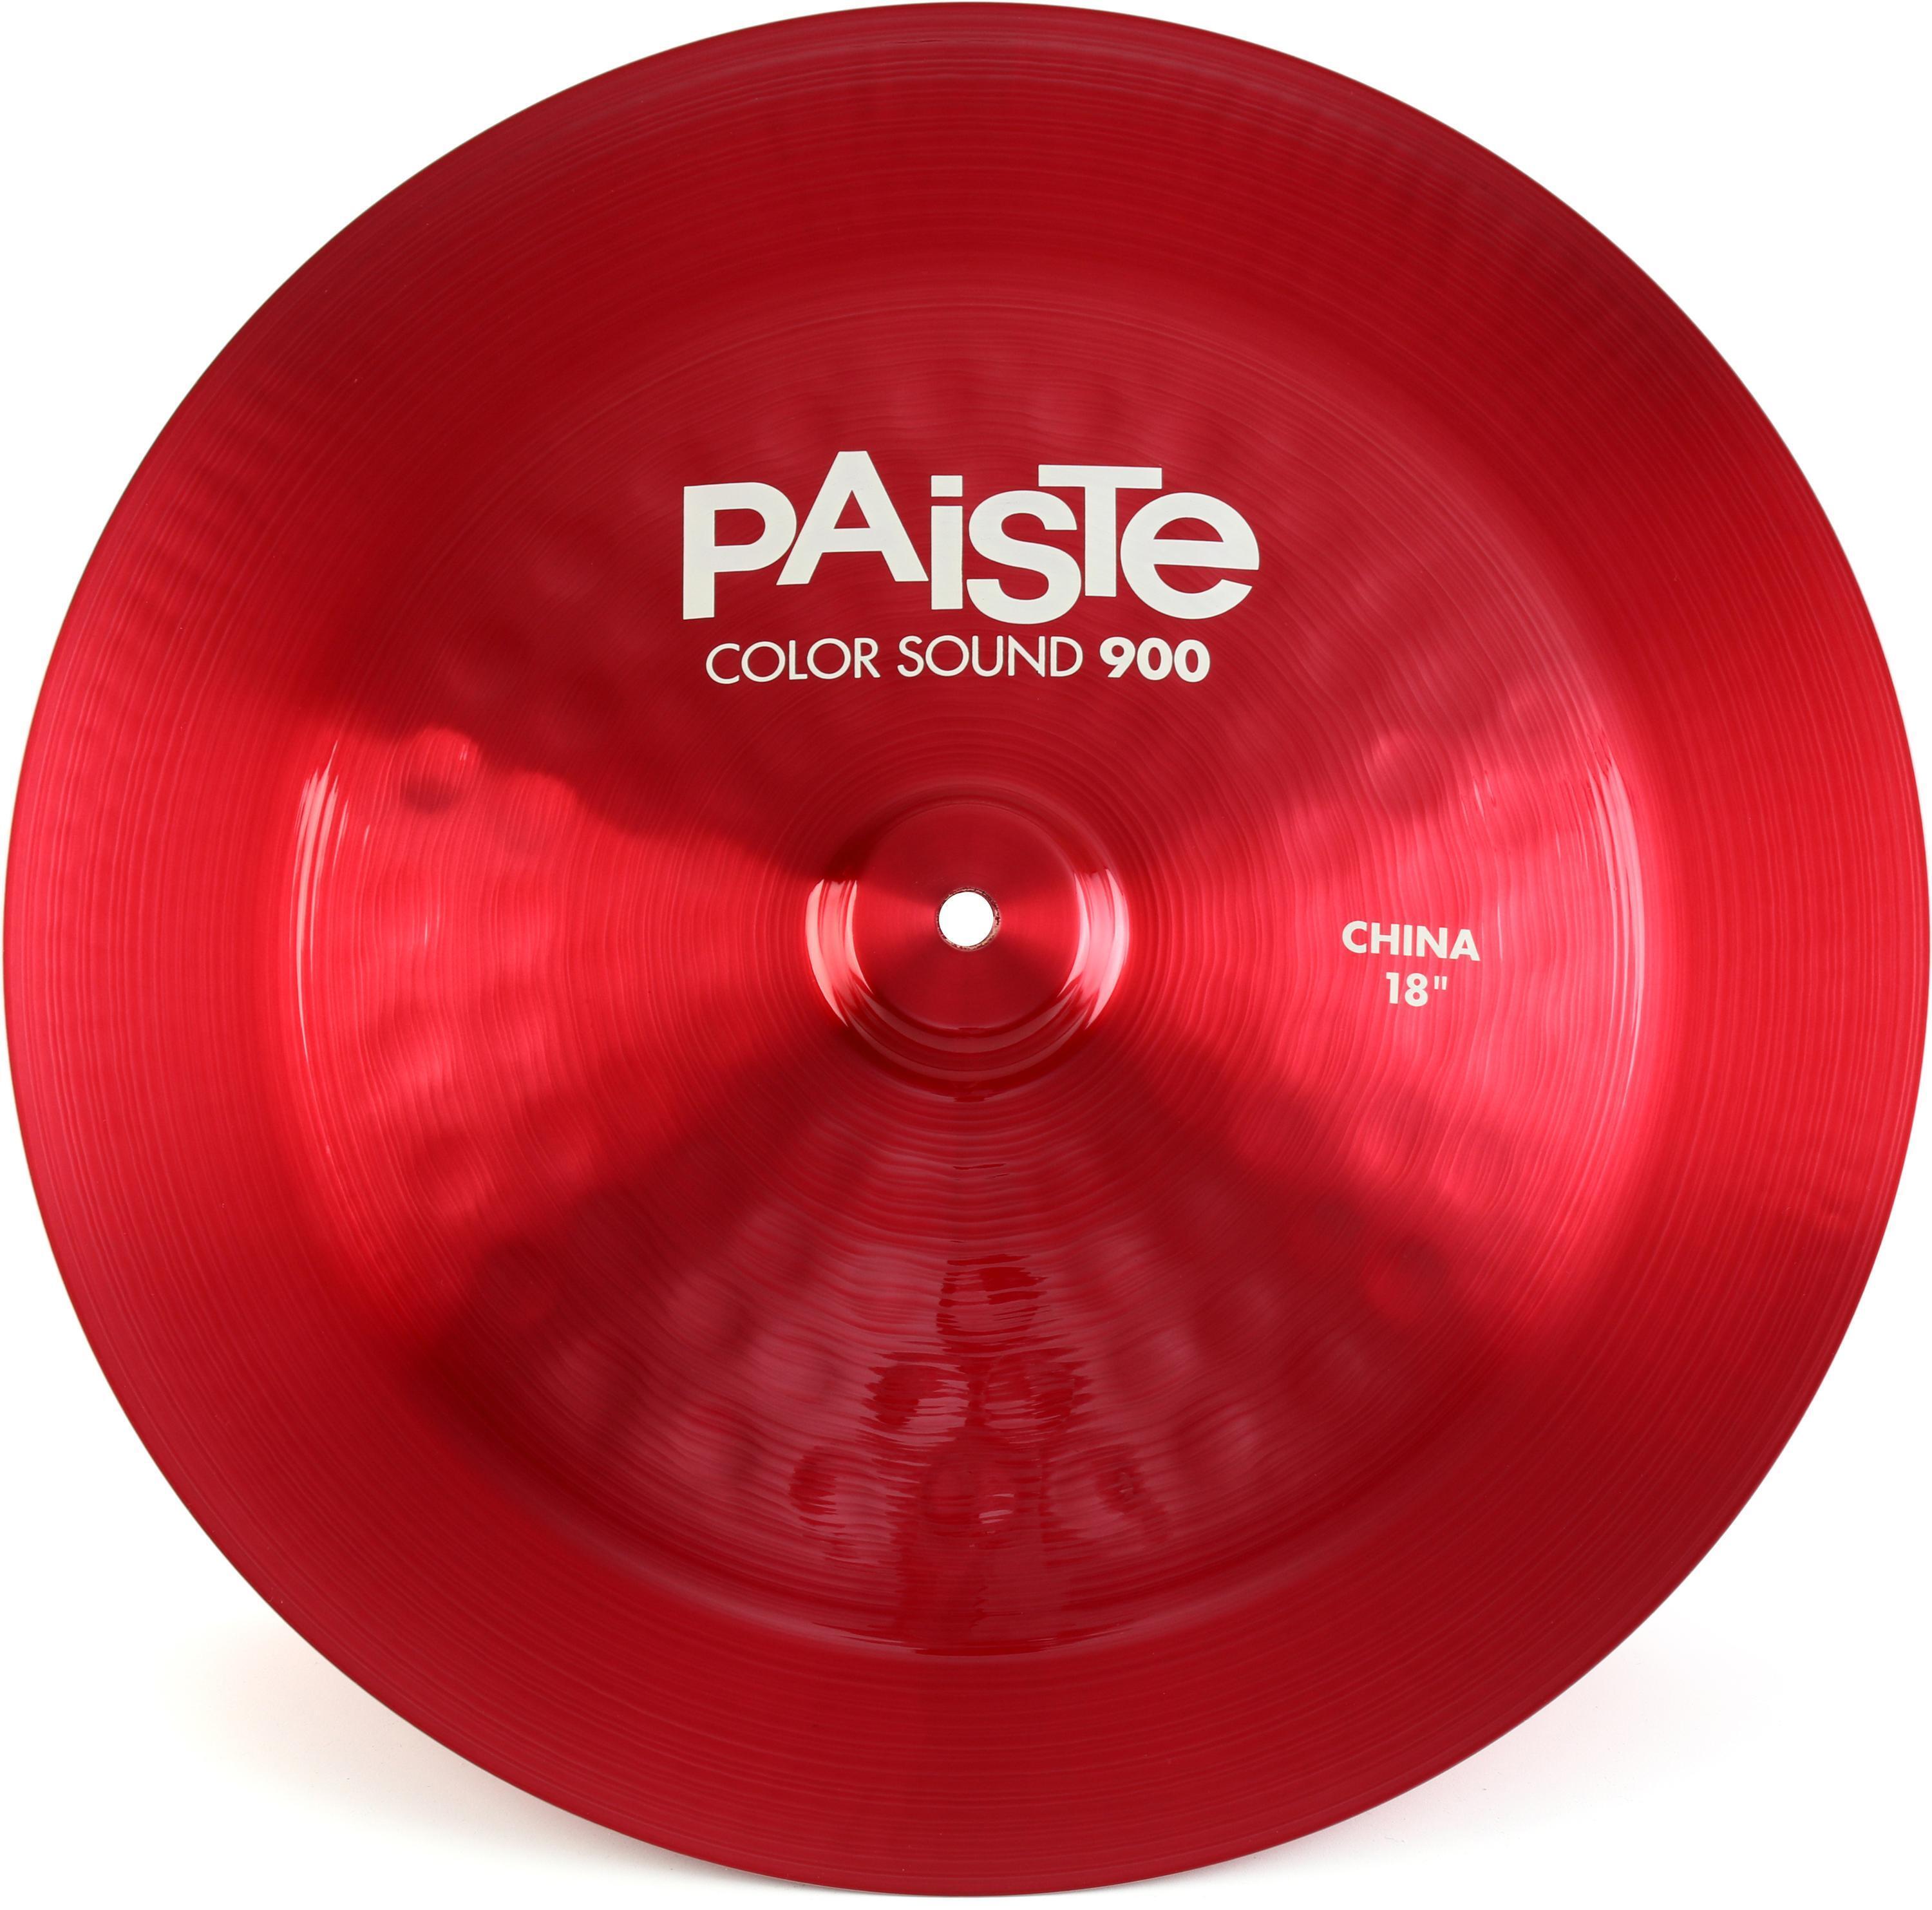 Paiste 18 inch Color Sound 900 Red China Cymbal | Sweetwater